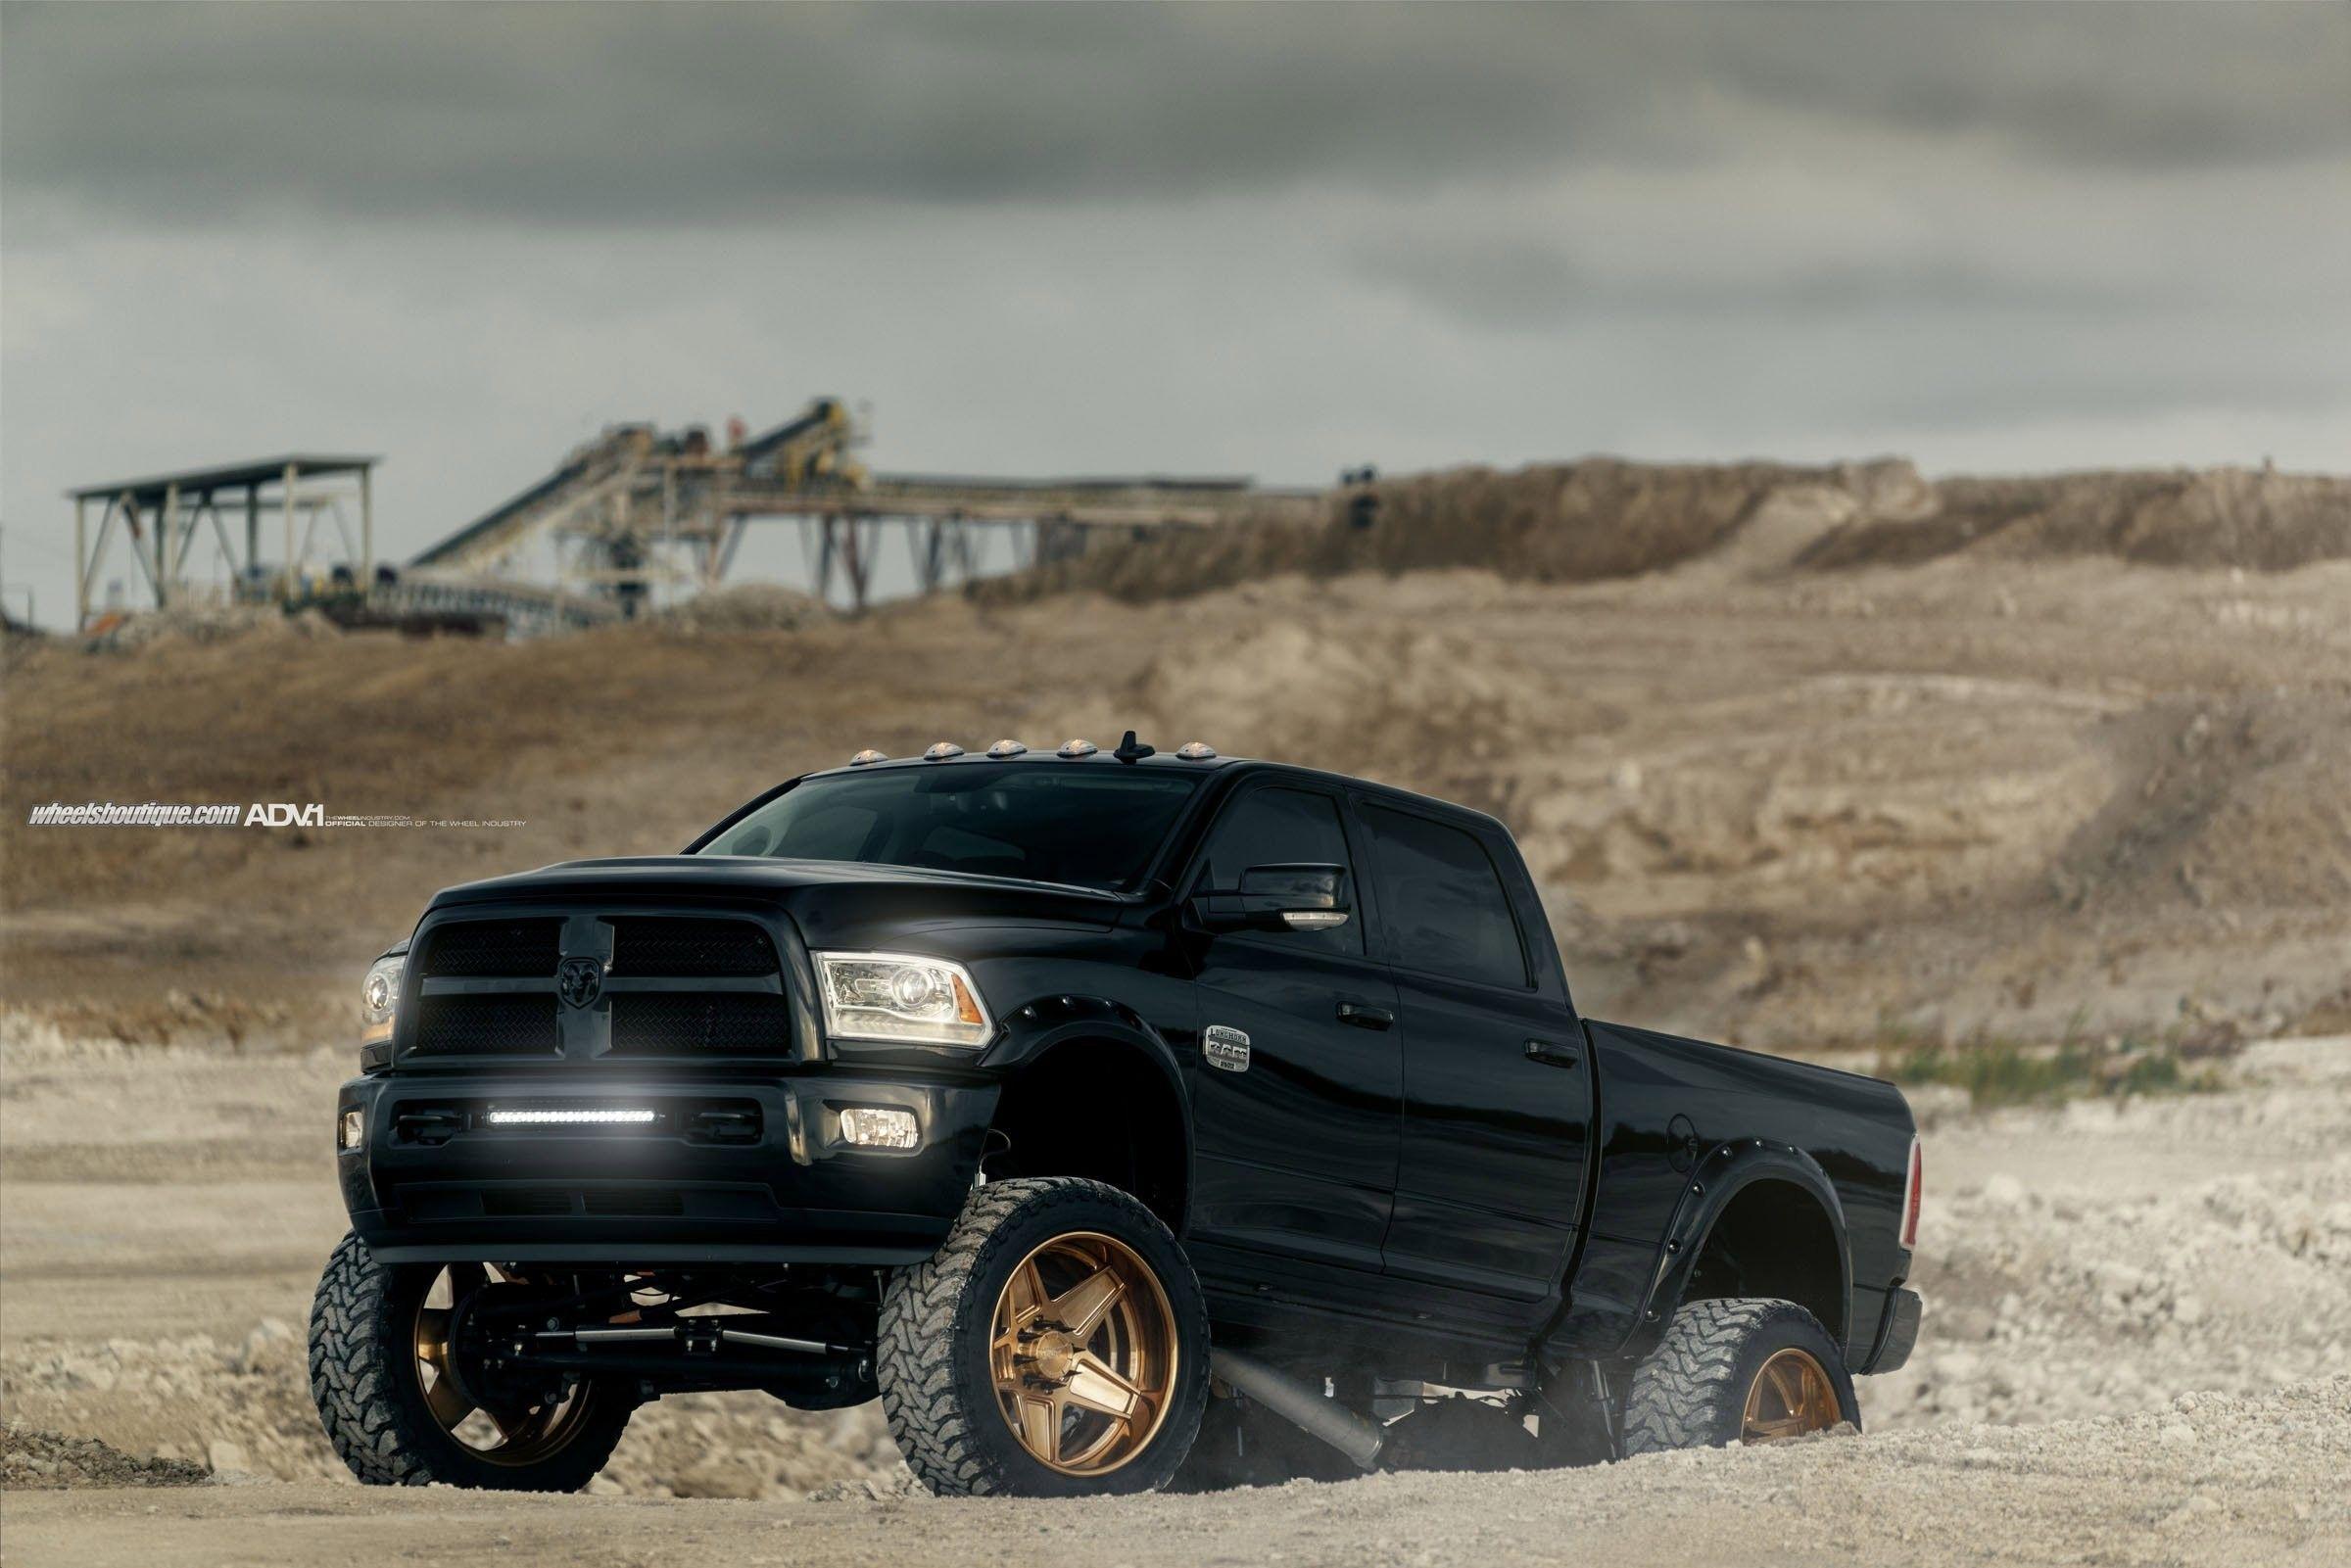 Lifted Trucks Wallpaper background picture